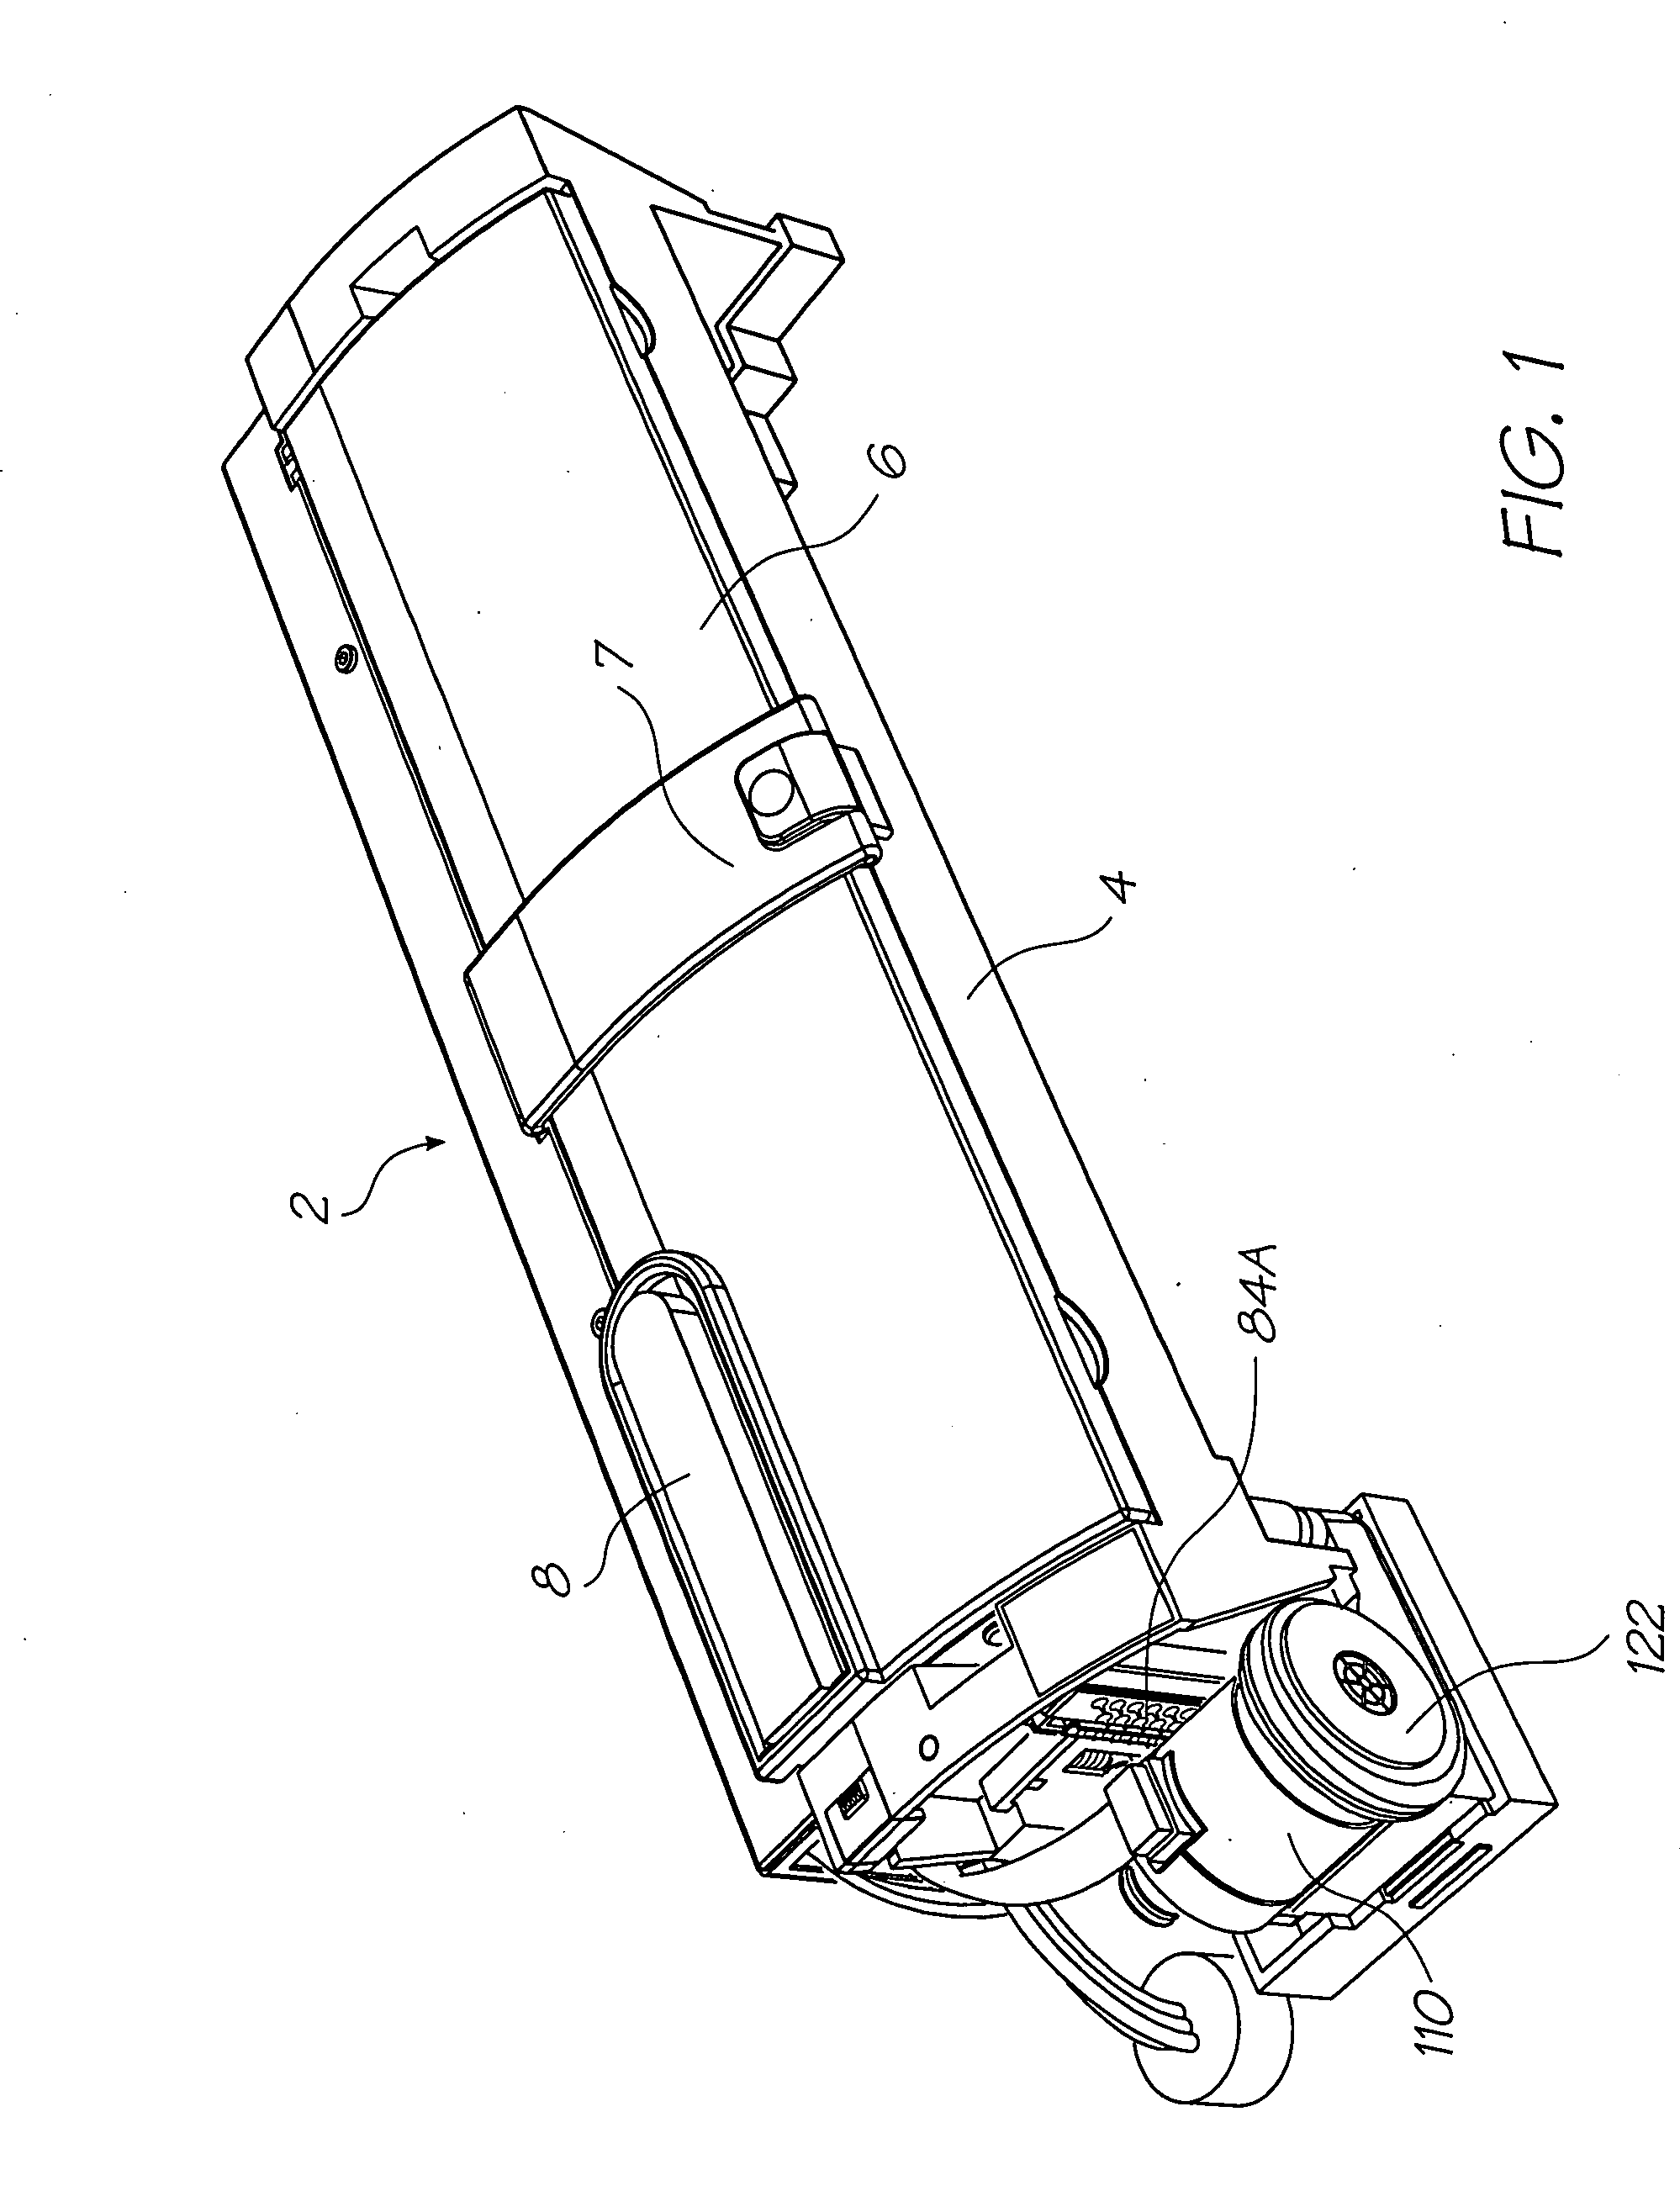 Inkjet printer cartridge with a compressed air port